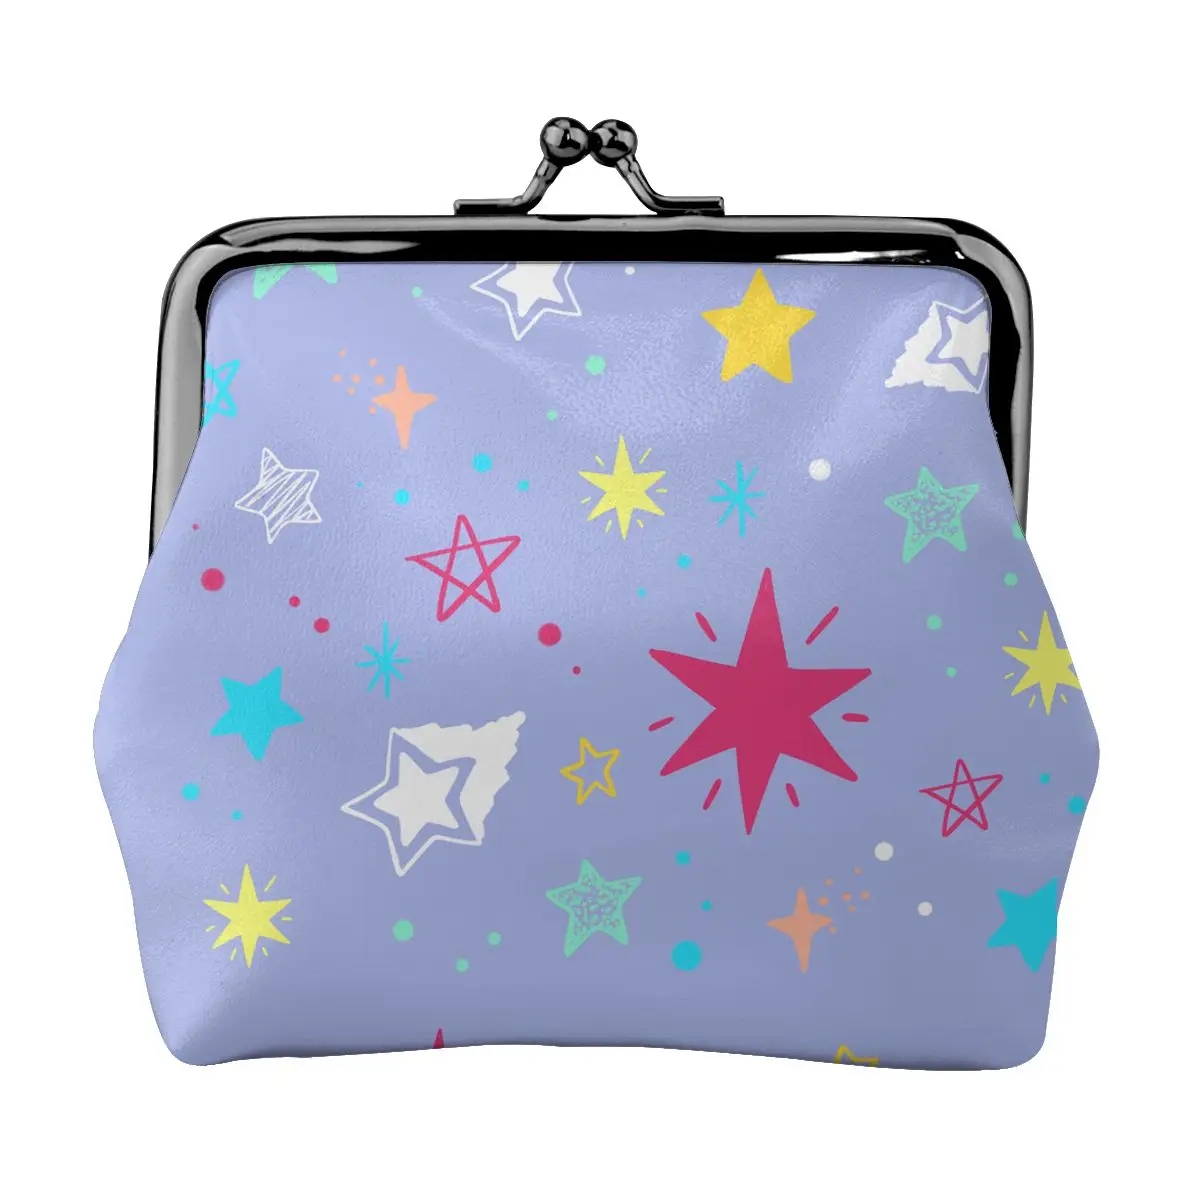 Women's Wallet Short Coin Purse Wallets For Woman Card Holder Lovely Stars